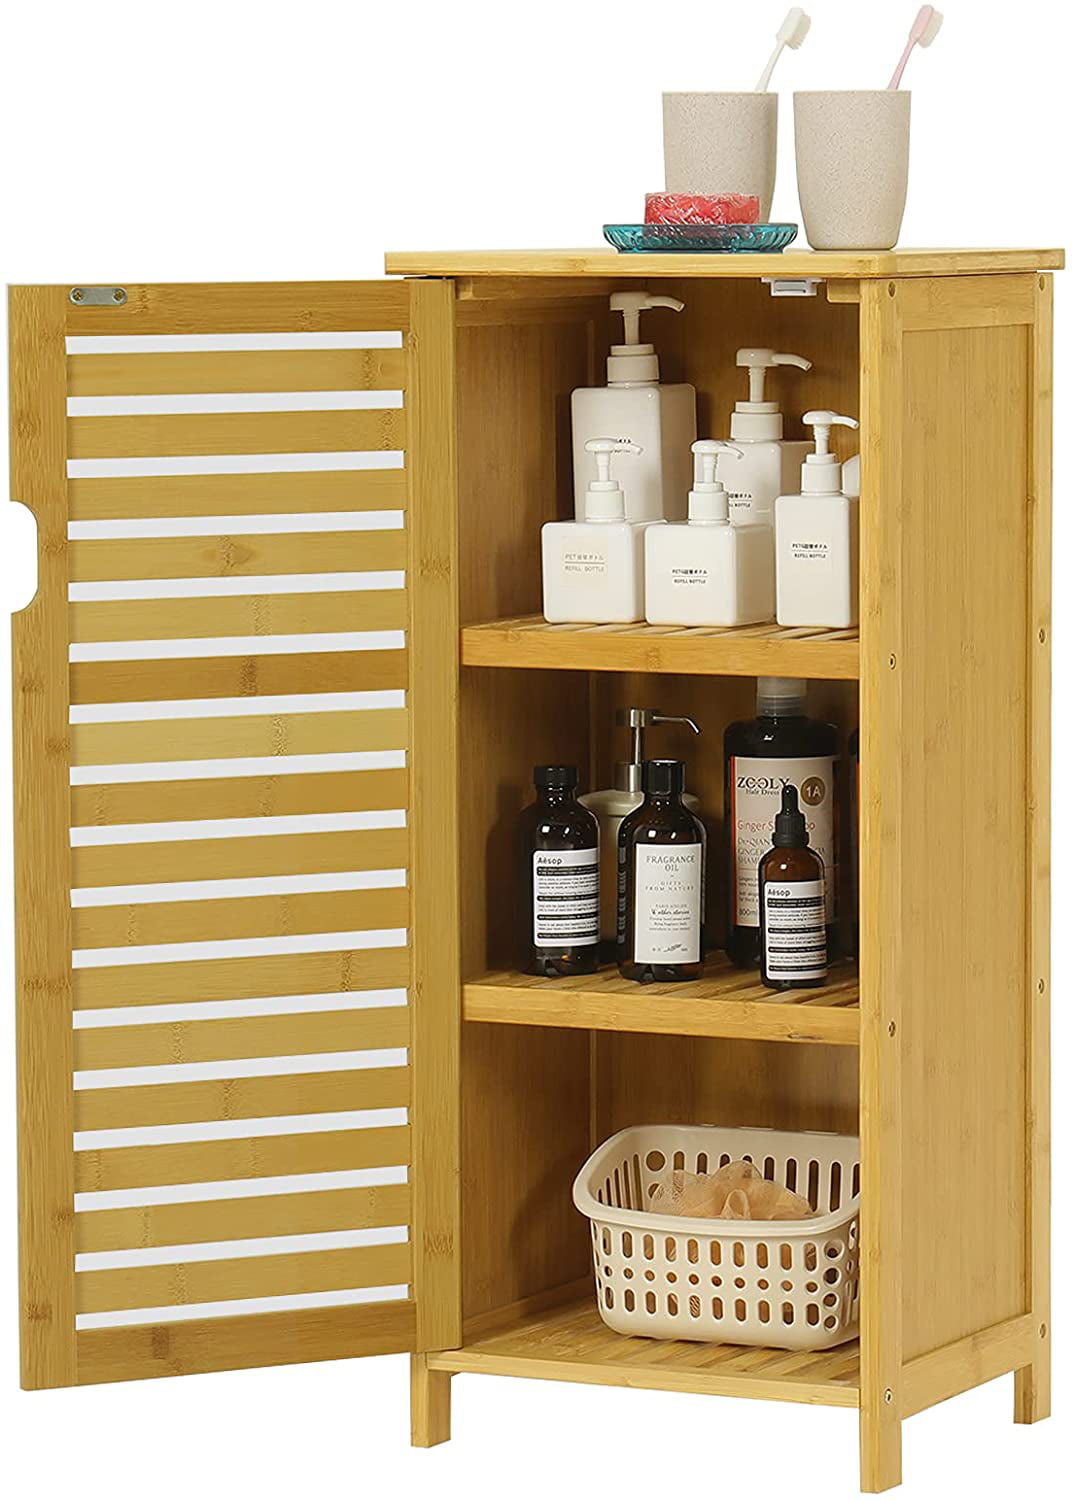  VIAGDO Over The Toilet Storage Cabinet, Tall Bathroom Cabinet  Organizer with Cupboard and Adjustable Shelves, Freestanding Toilet Shelf  Space Saver Rack Stand for Laundry Room, Balcony, Bamboo : Home & Kitchen